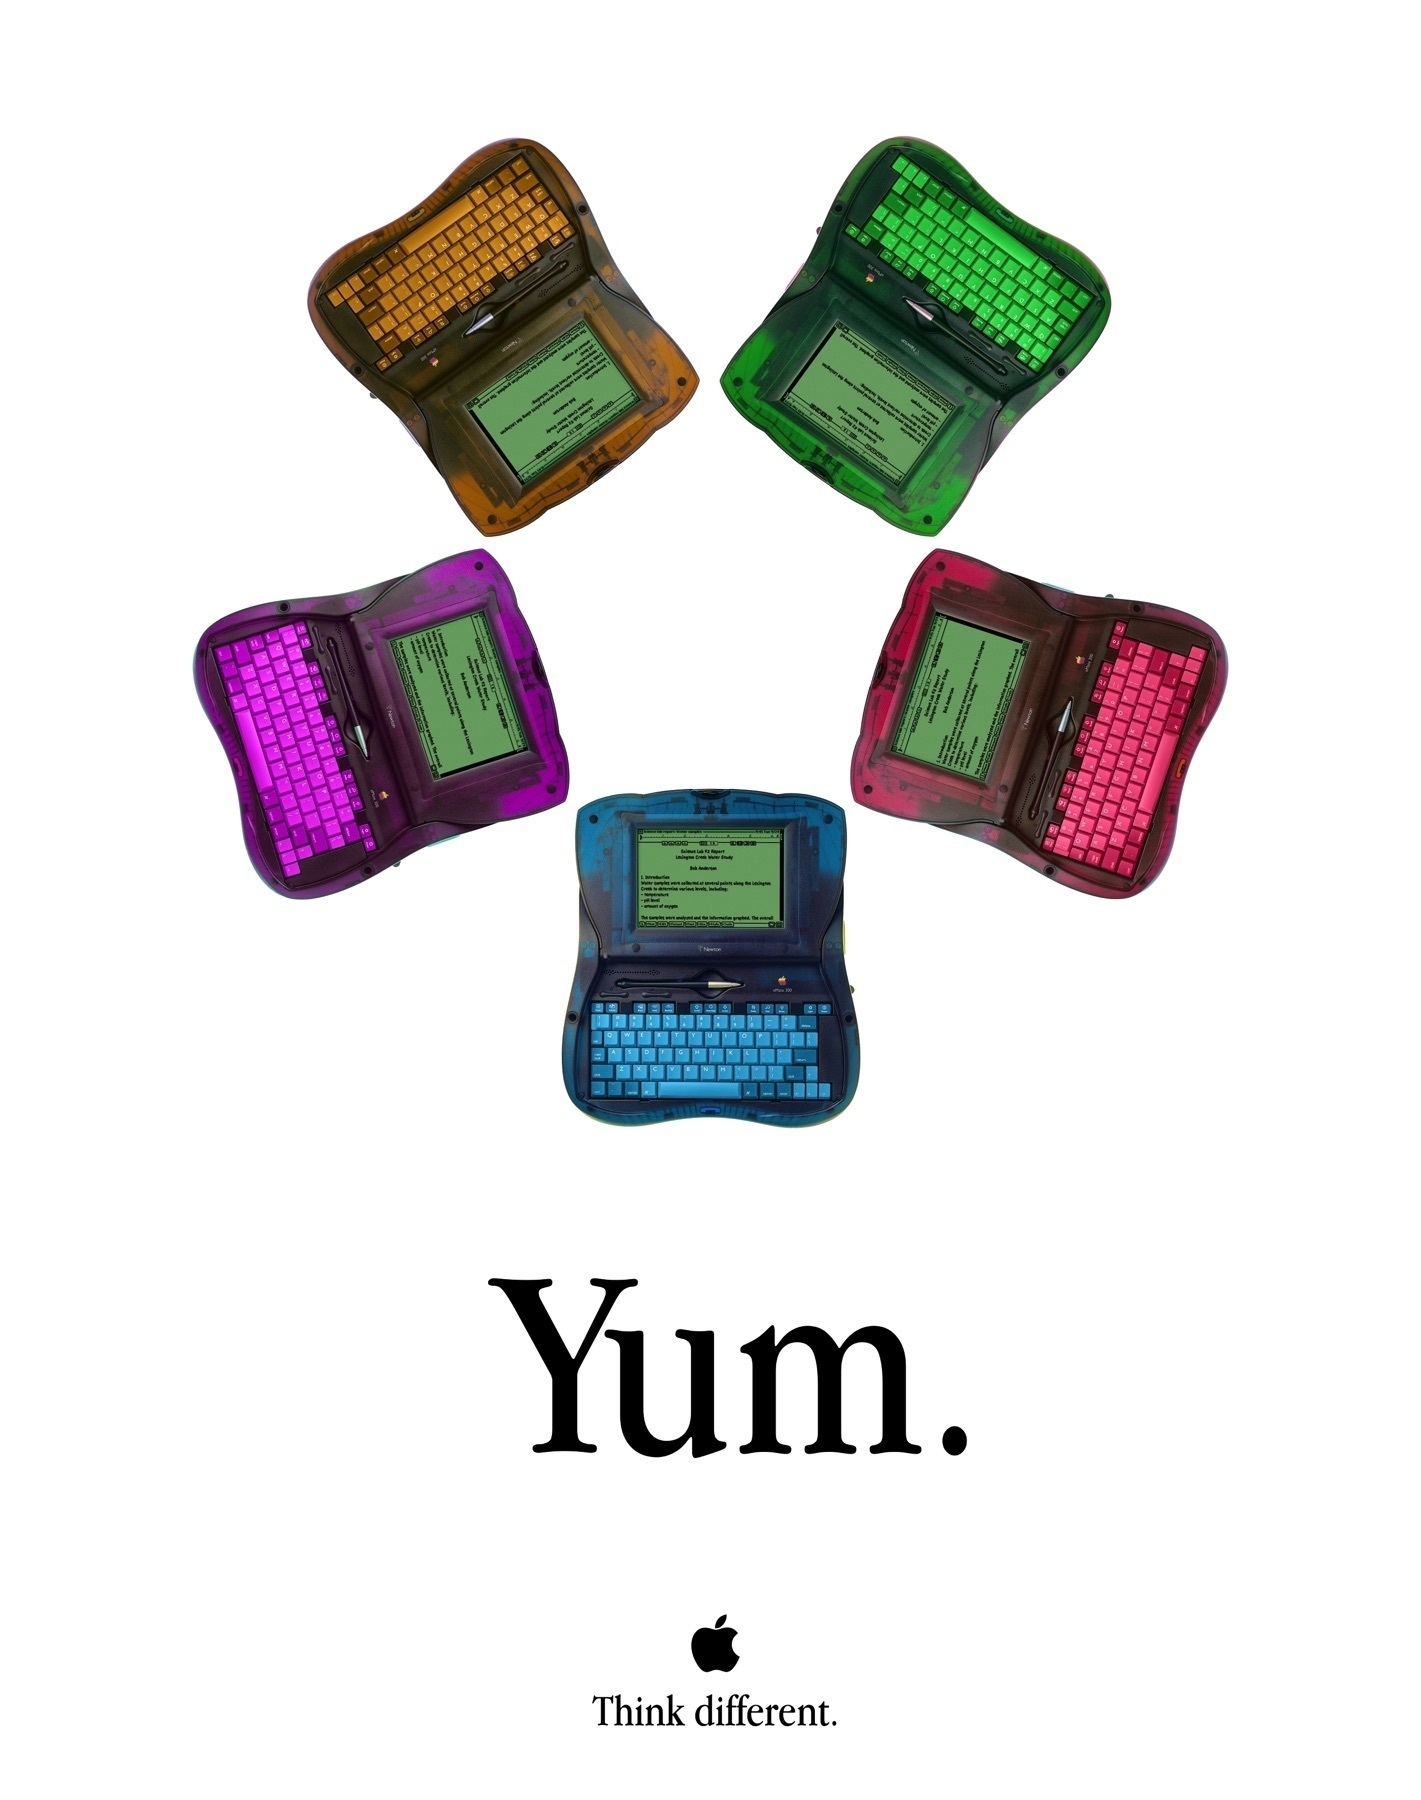 Five brightly colored eMate 300 in the iMac five color poster design with the title “Yum.” followed by the Apple logo and “Think different.”